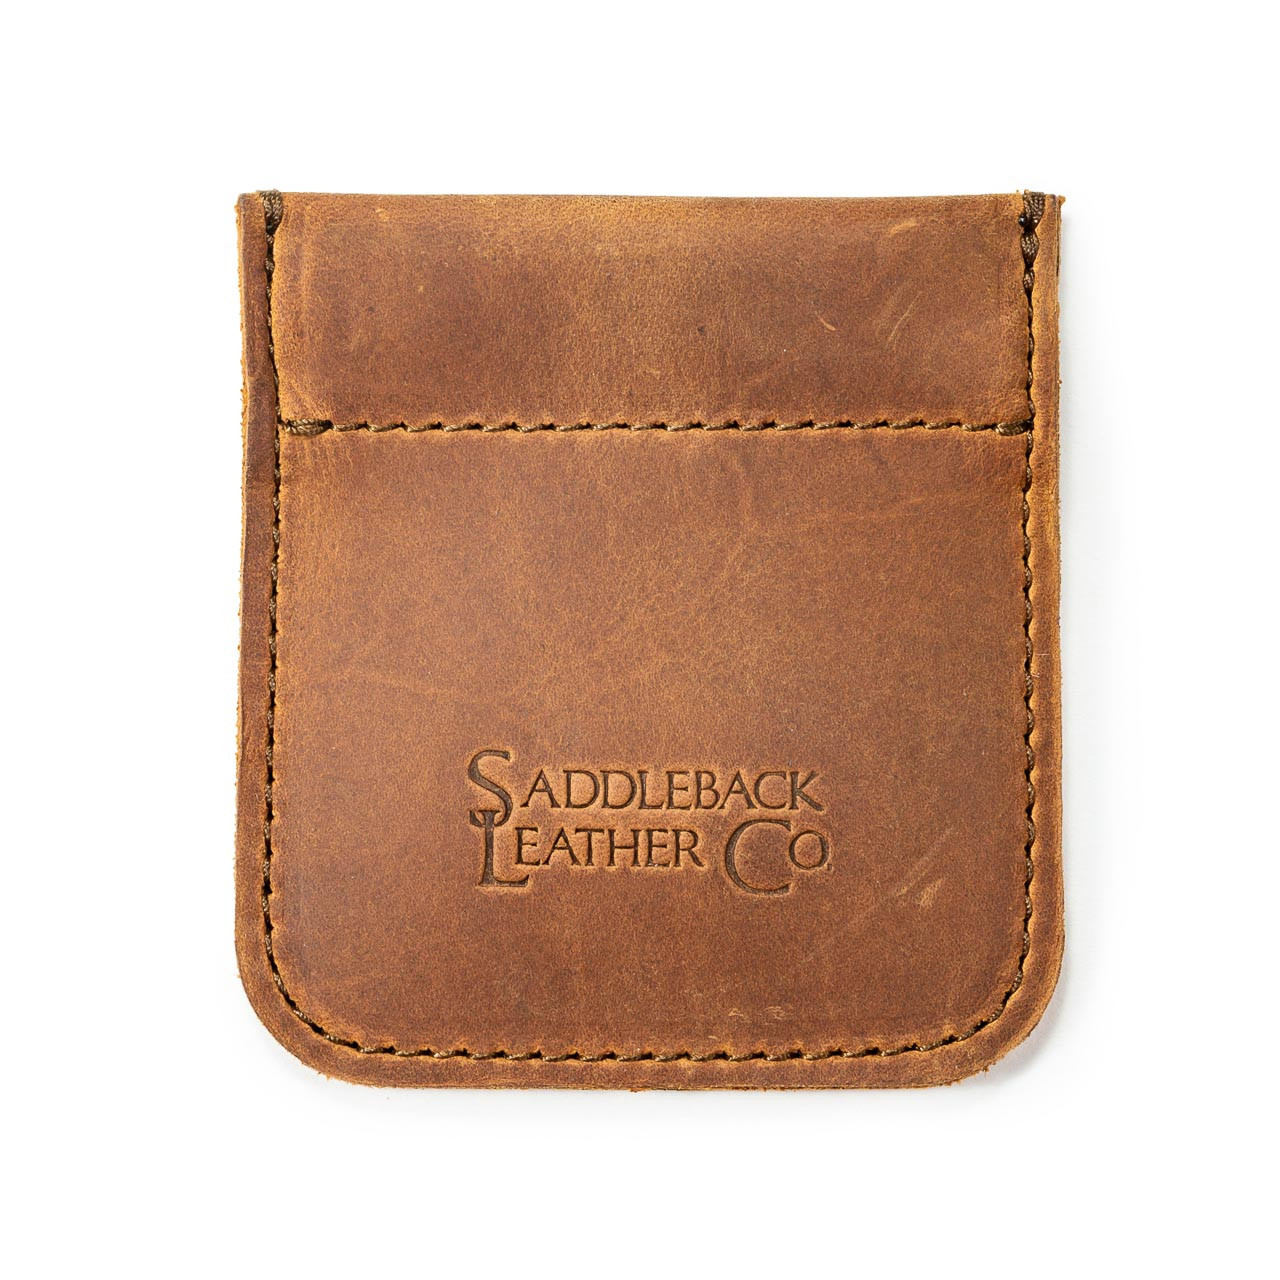 Leather Coin Purse – A Smart Accessory to Hold Your Change